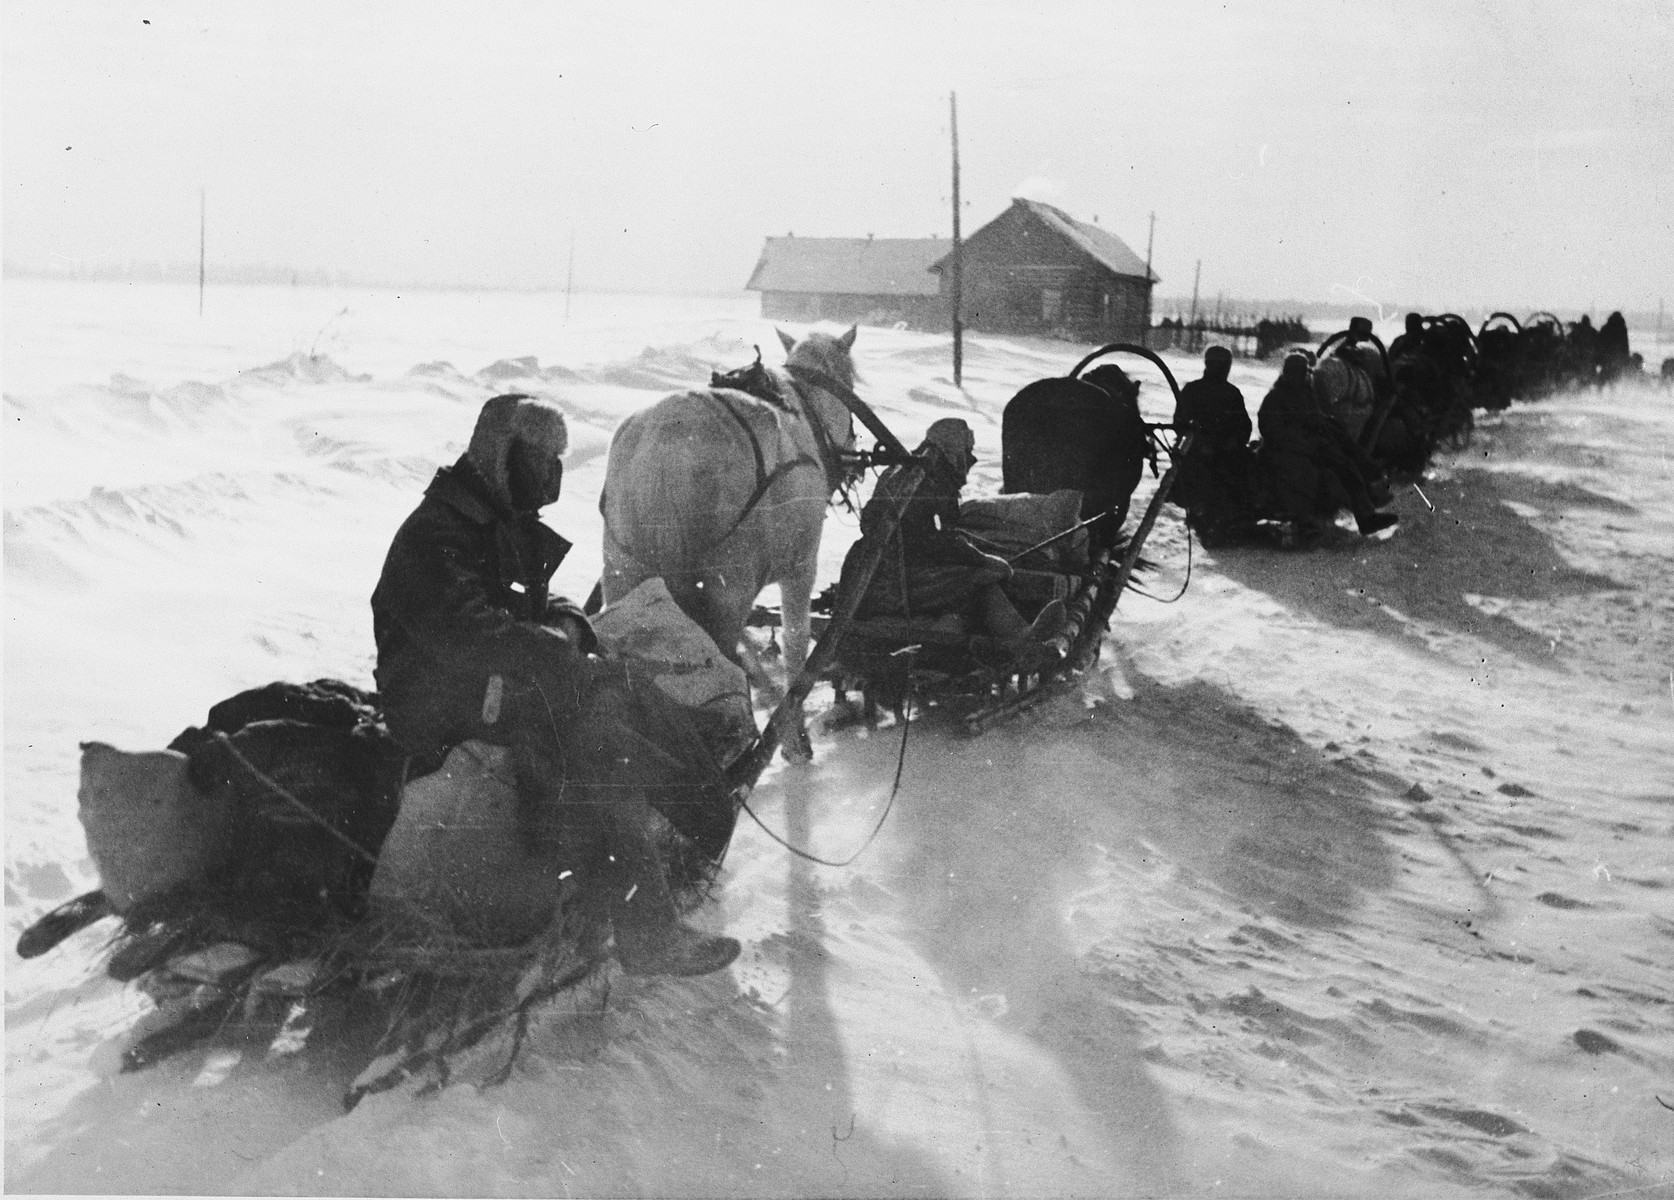 German soldiers ride in a caravan of horse-drawn sleighs through heavy snow [probably in the Soviet Union].